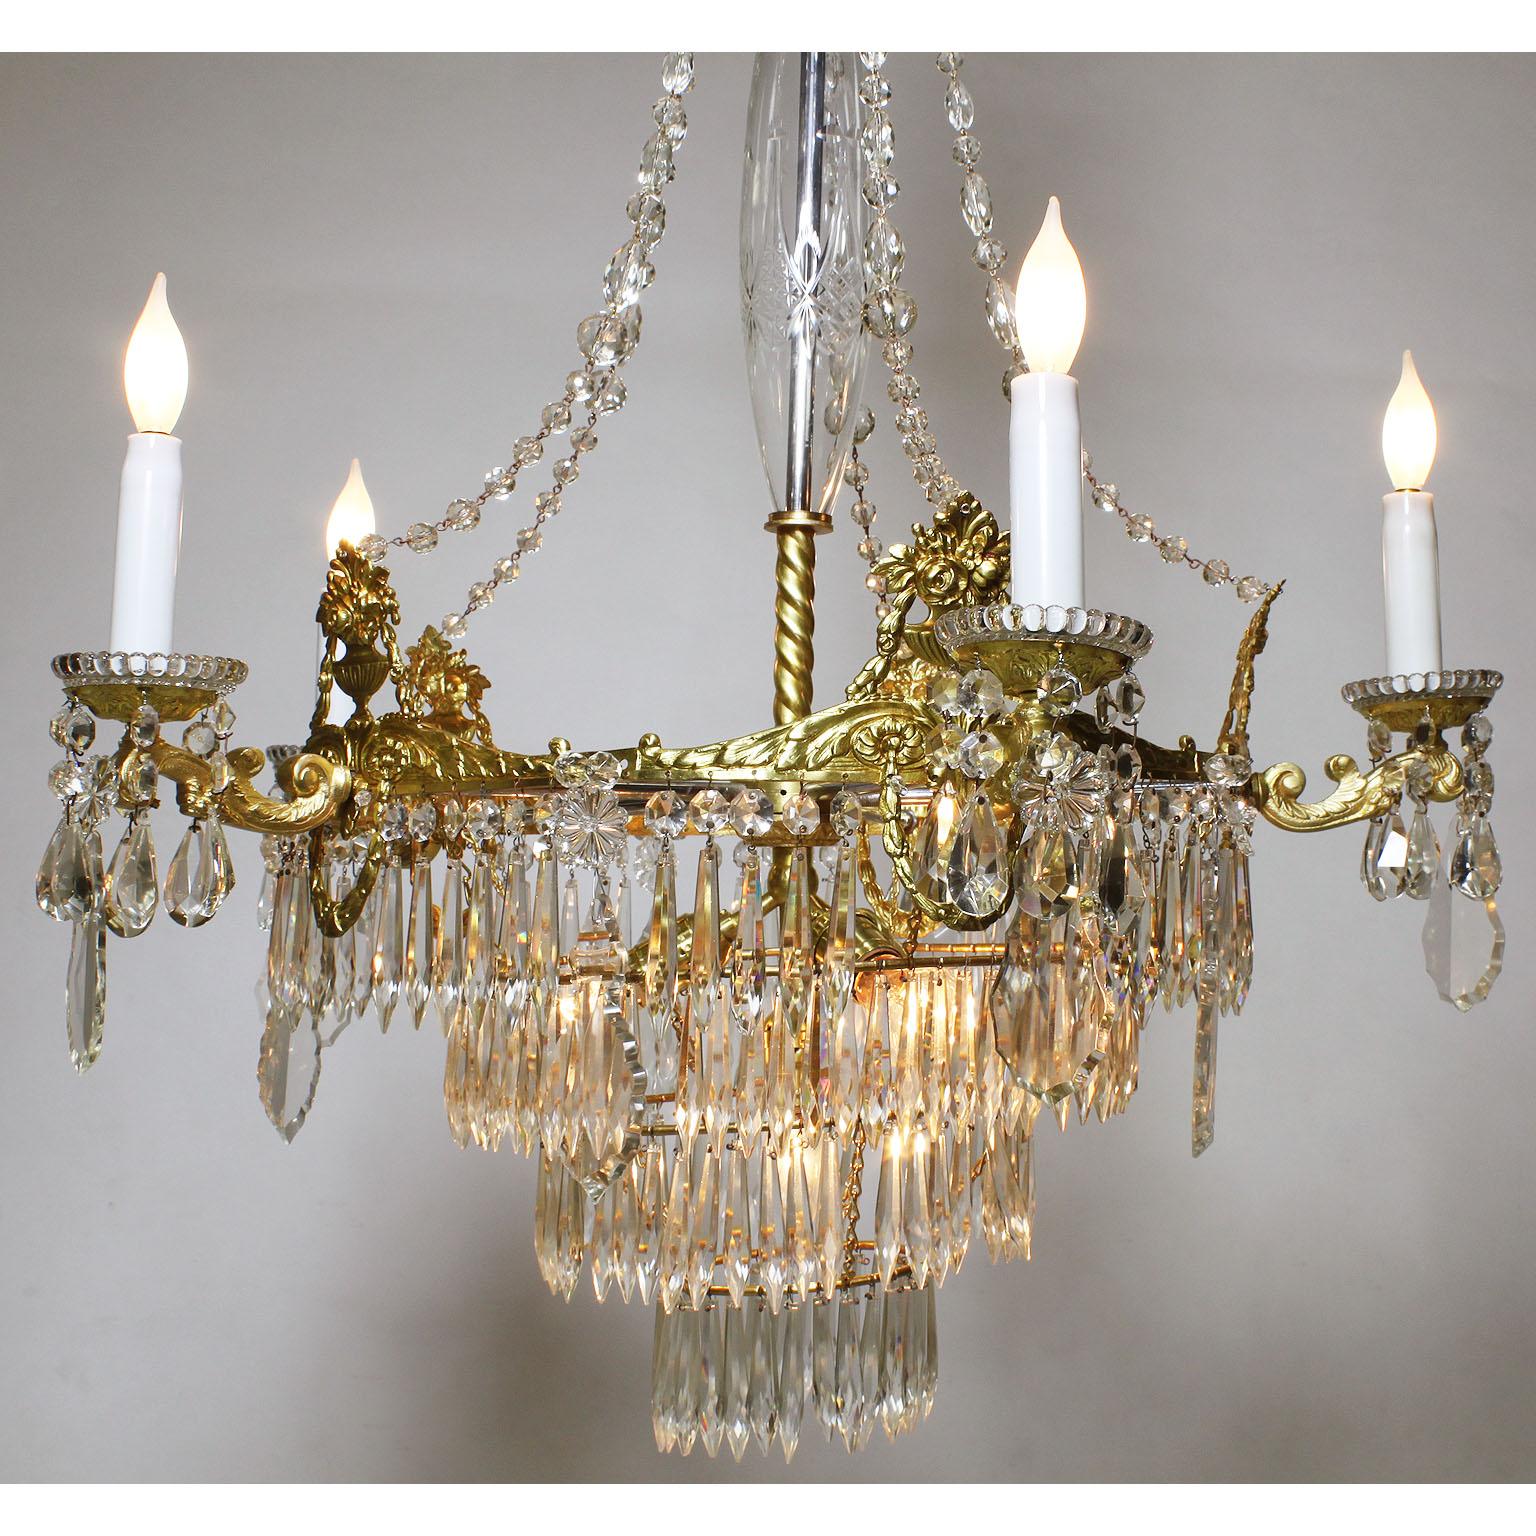 A fine and rare French 19th century neoclassical Revival style gilt-metal and cut-glass prisms five-light chandelier. The classical style frame decorated with floral urns and surmounted with five  